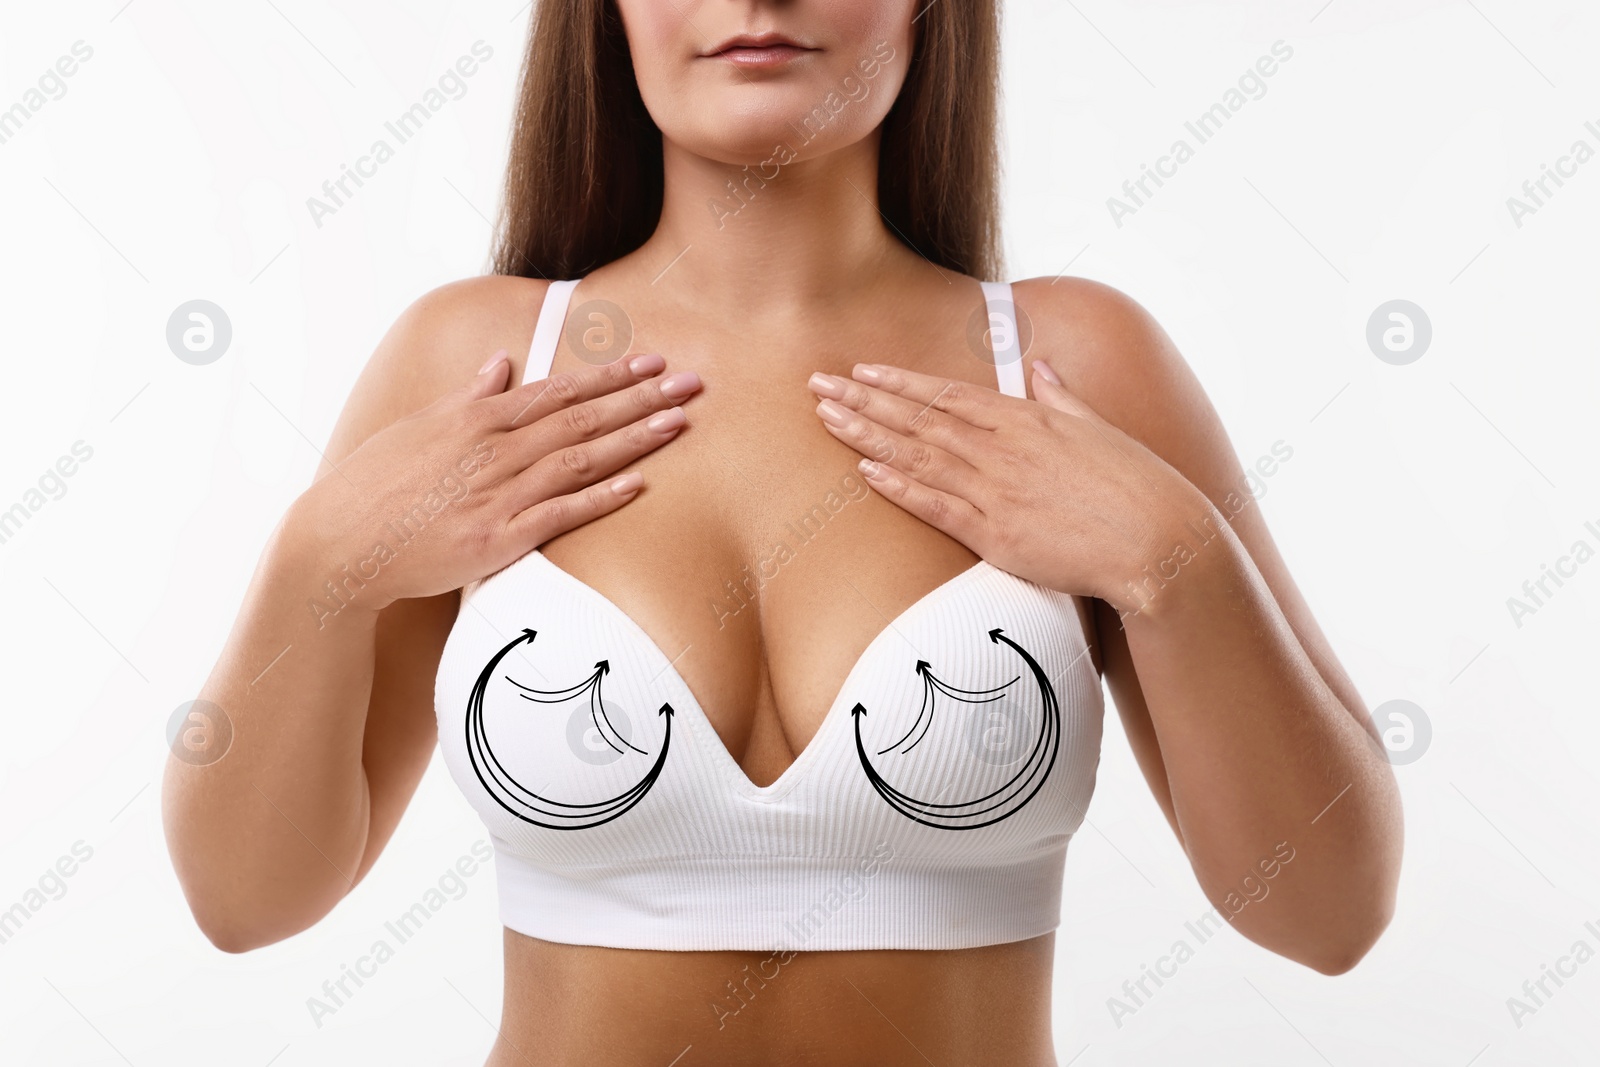 Image of Breast surgery. Woman with markings on bra against white background, closeup